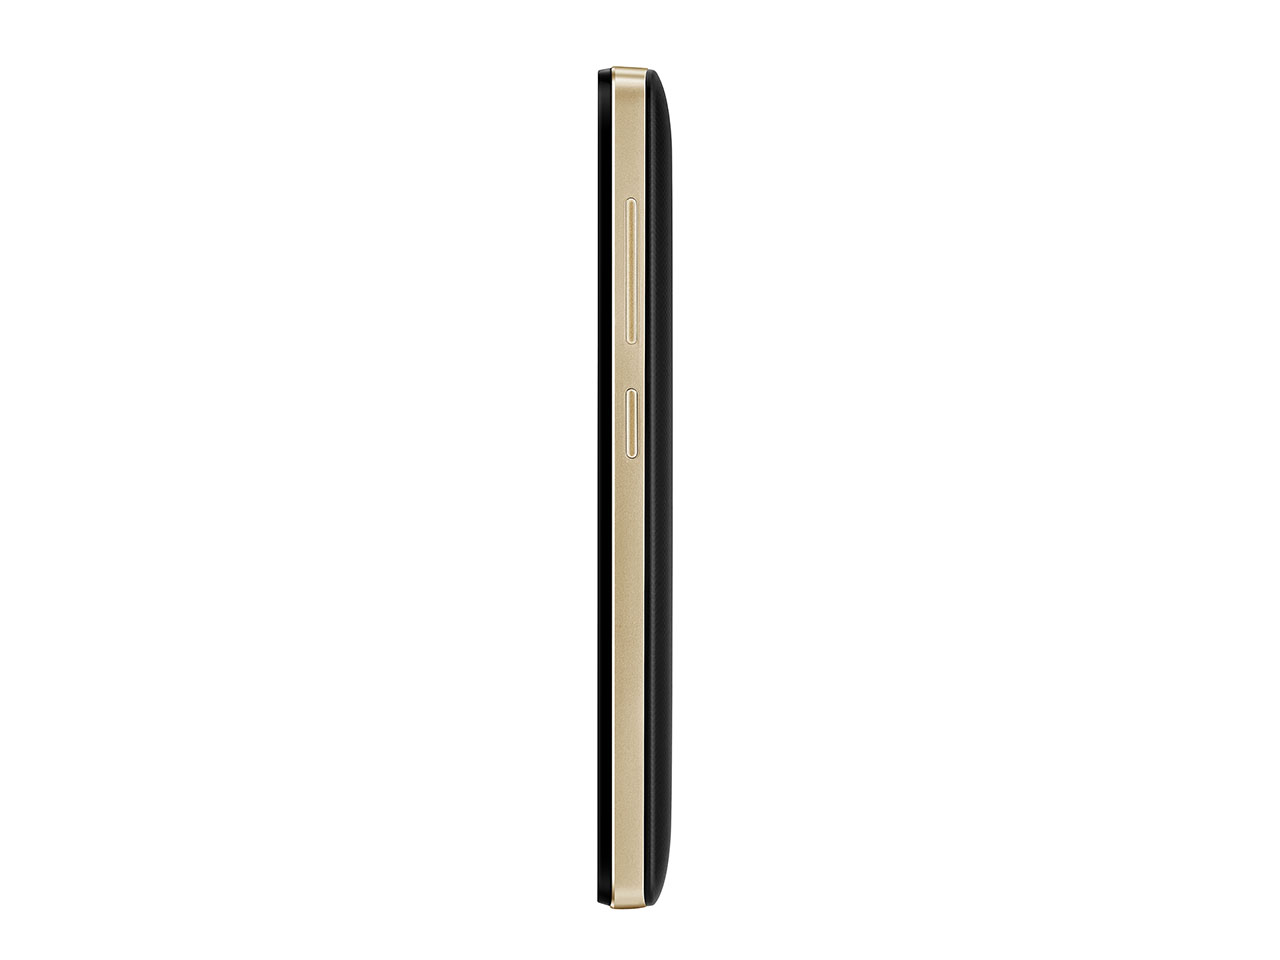 Gionee V183 side view